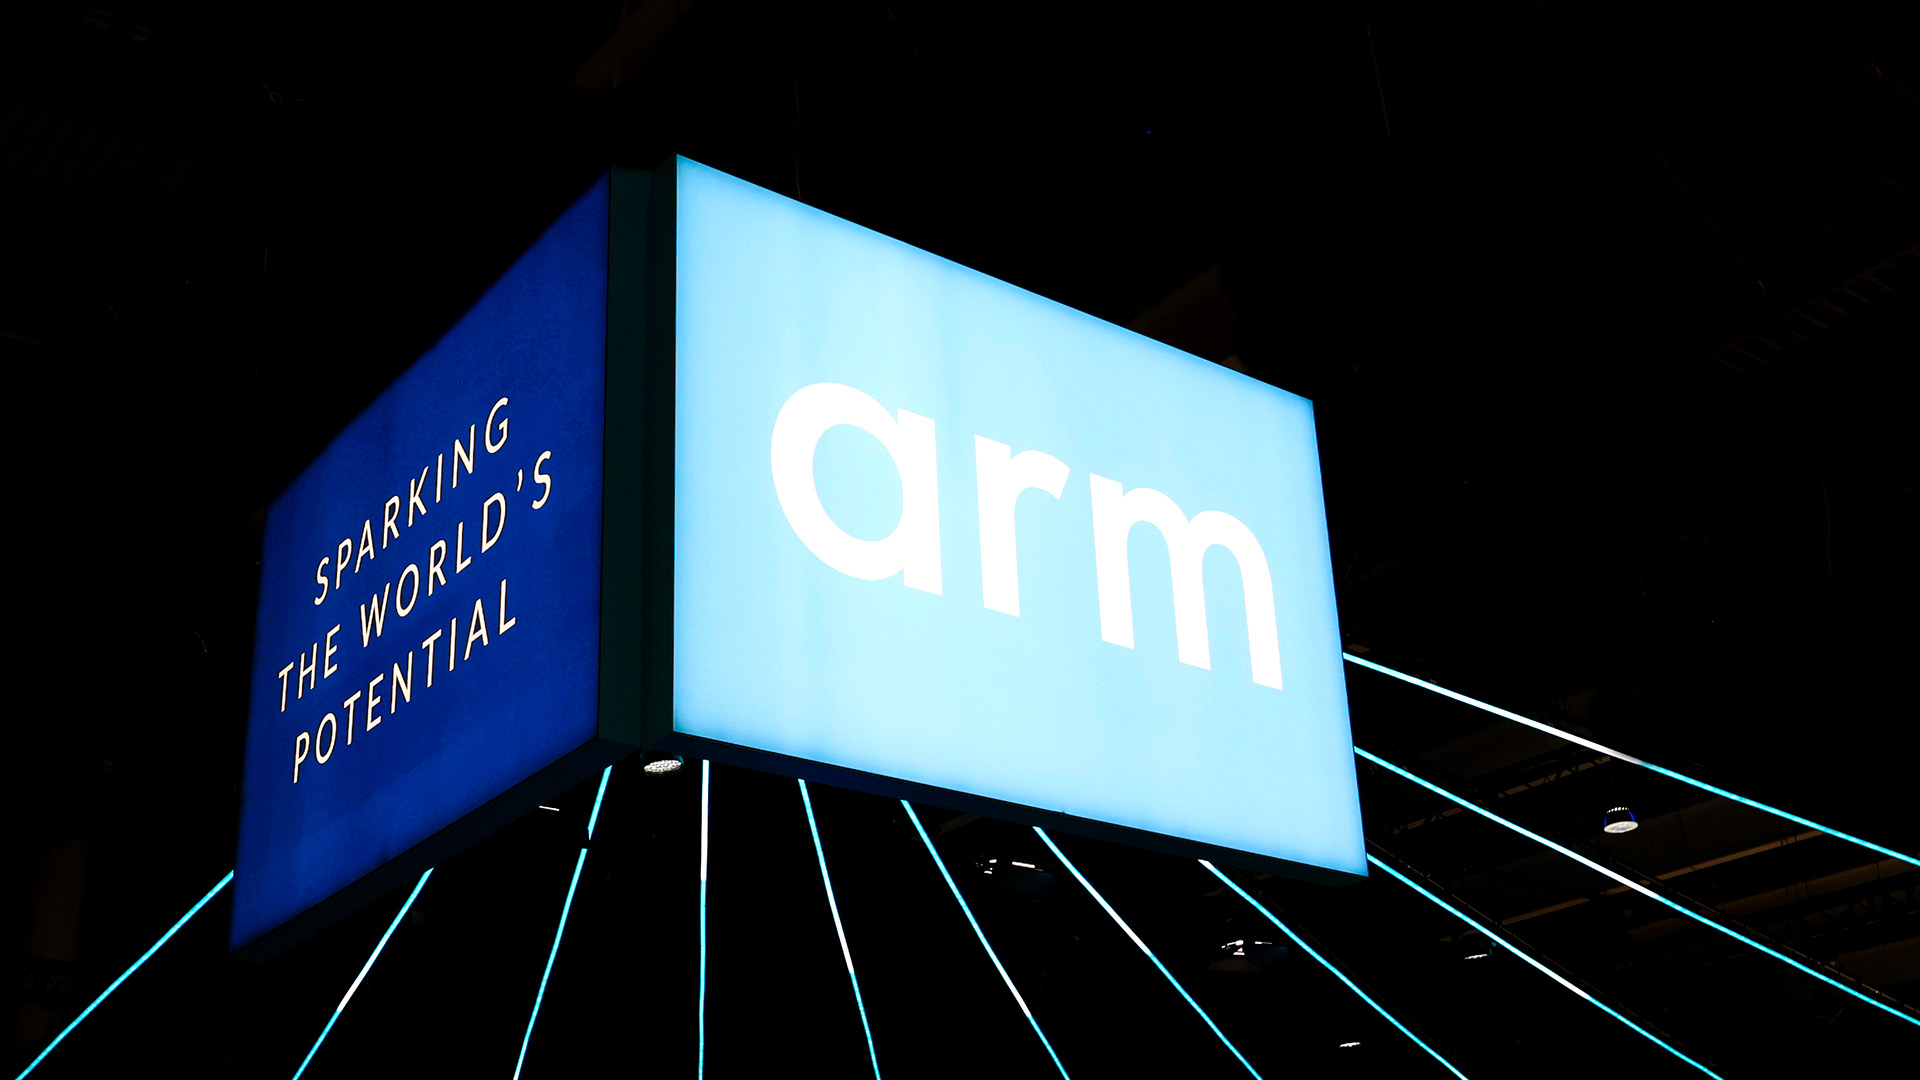  Arm China finally boots rogue CEO that's held it hostage with a 'chop' for years 